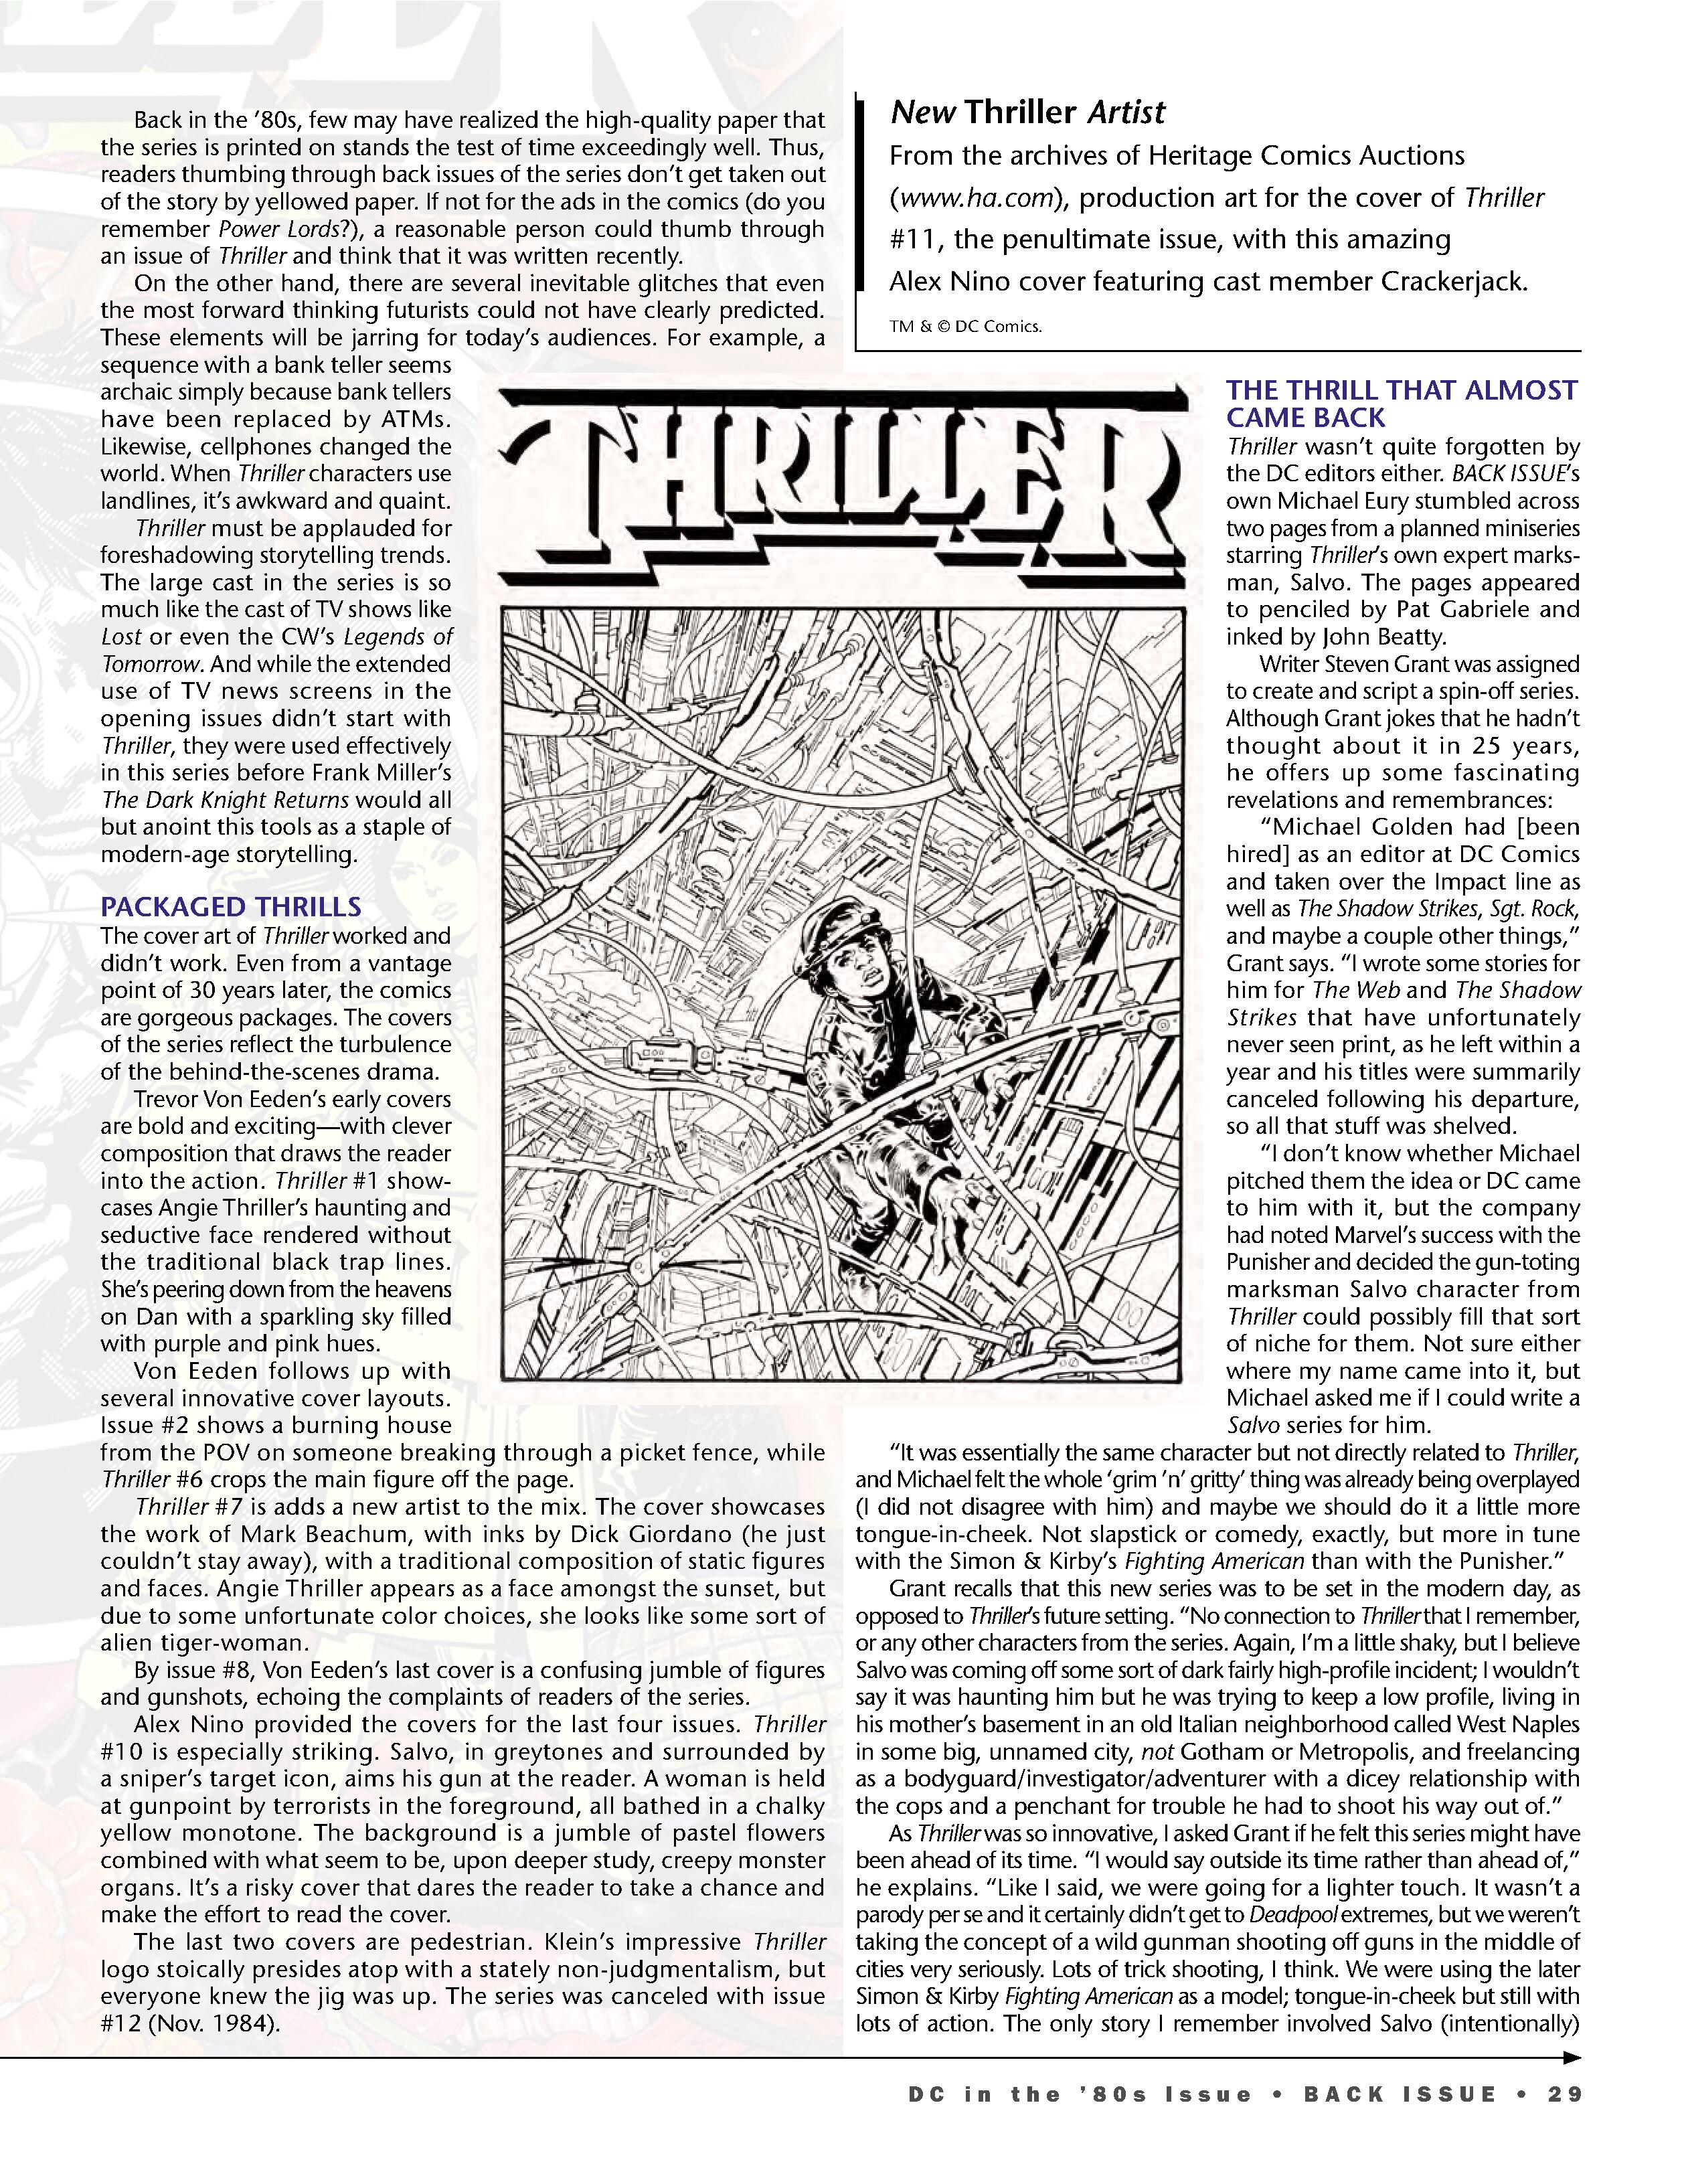 Read online Back Issue comic -  Issue #98 - 31